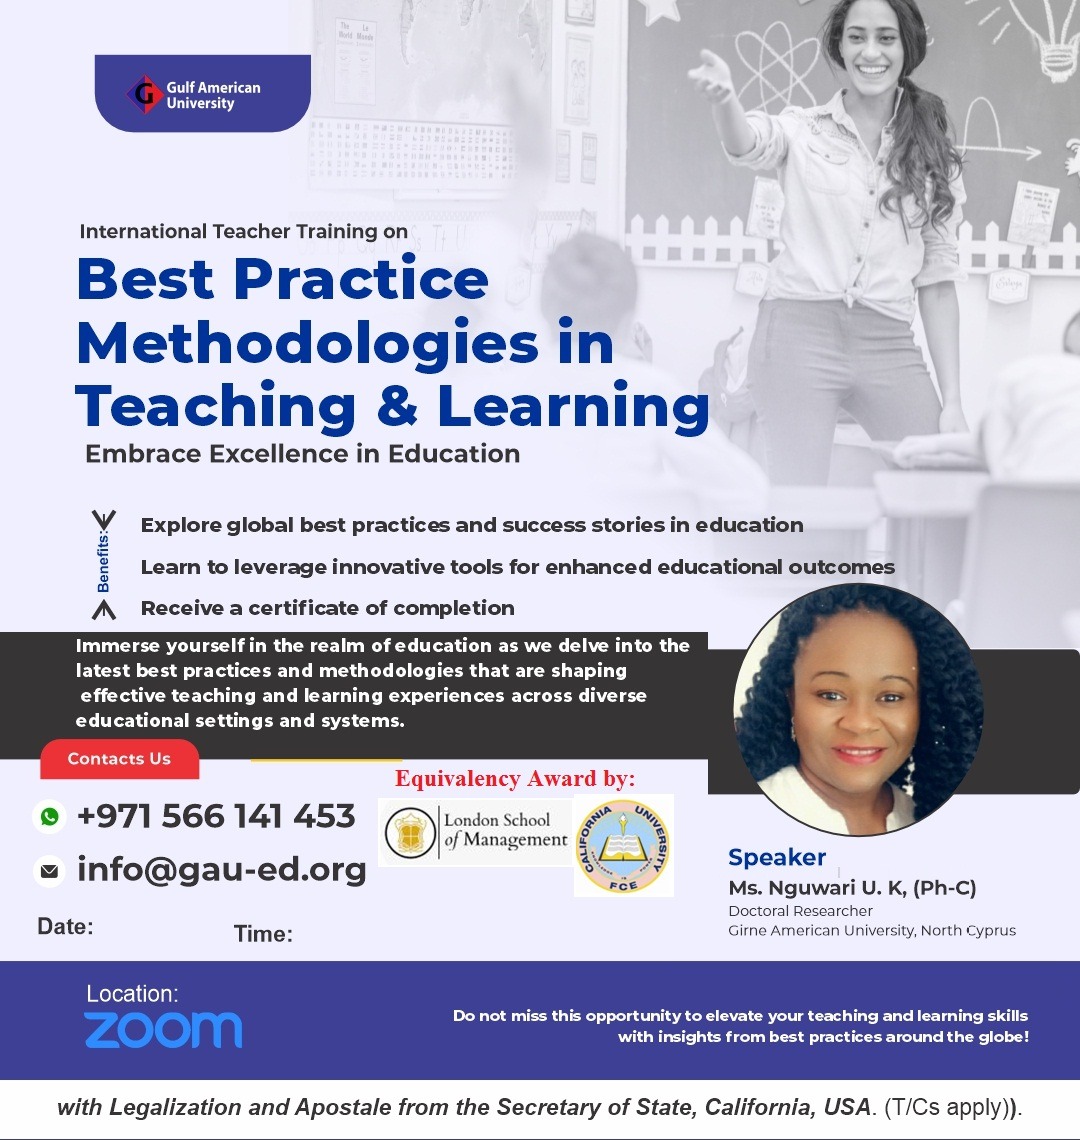 Unlock the keys to exceptional education with GAU’s International Teacher Training on Best Practice Methodologies in Teaching & Learning!